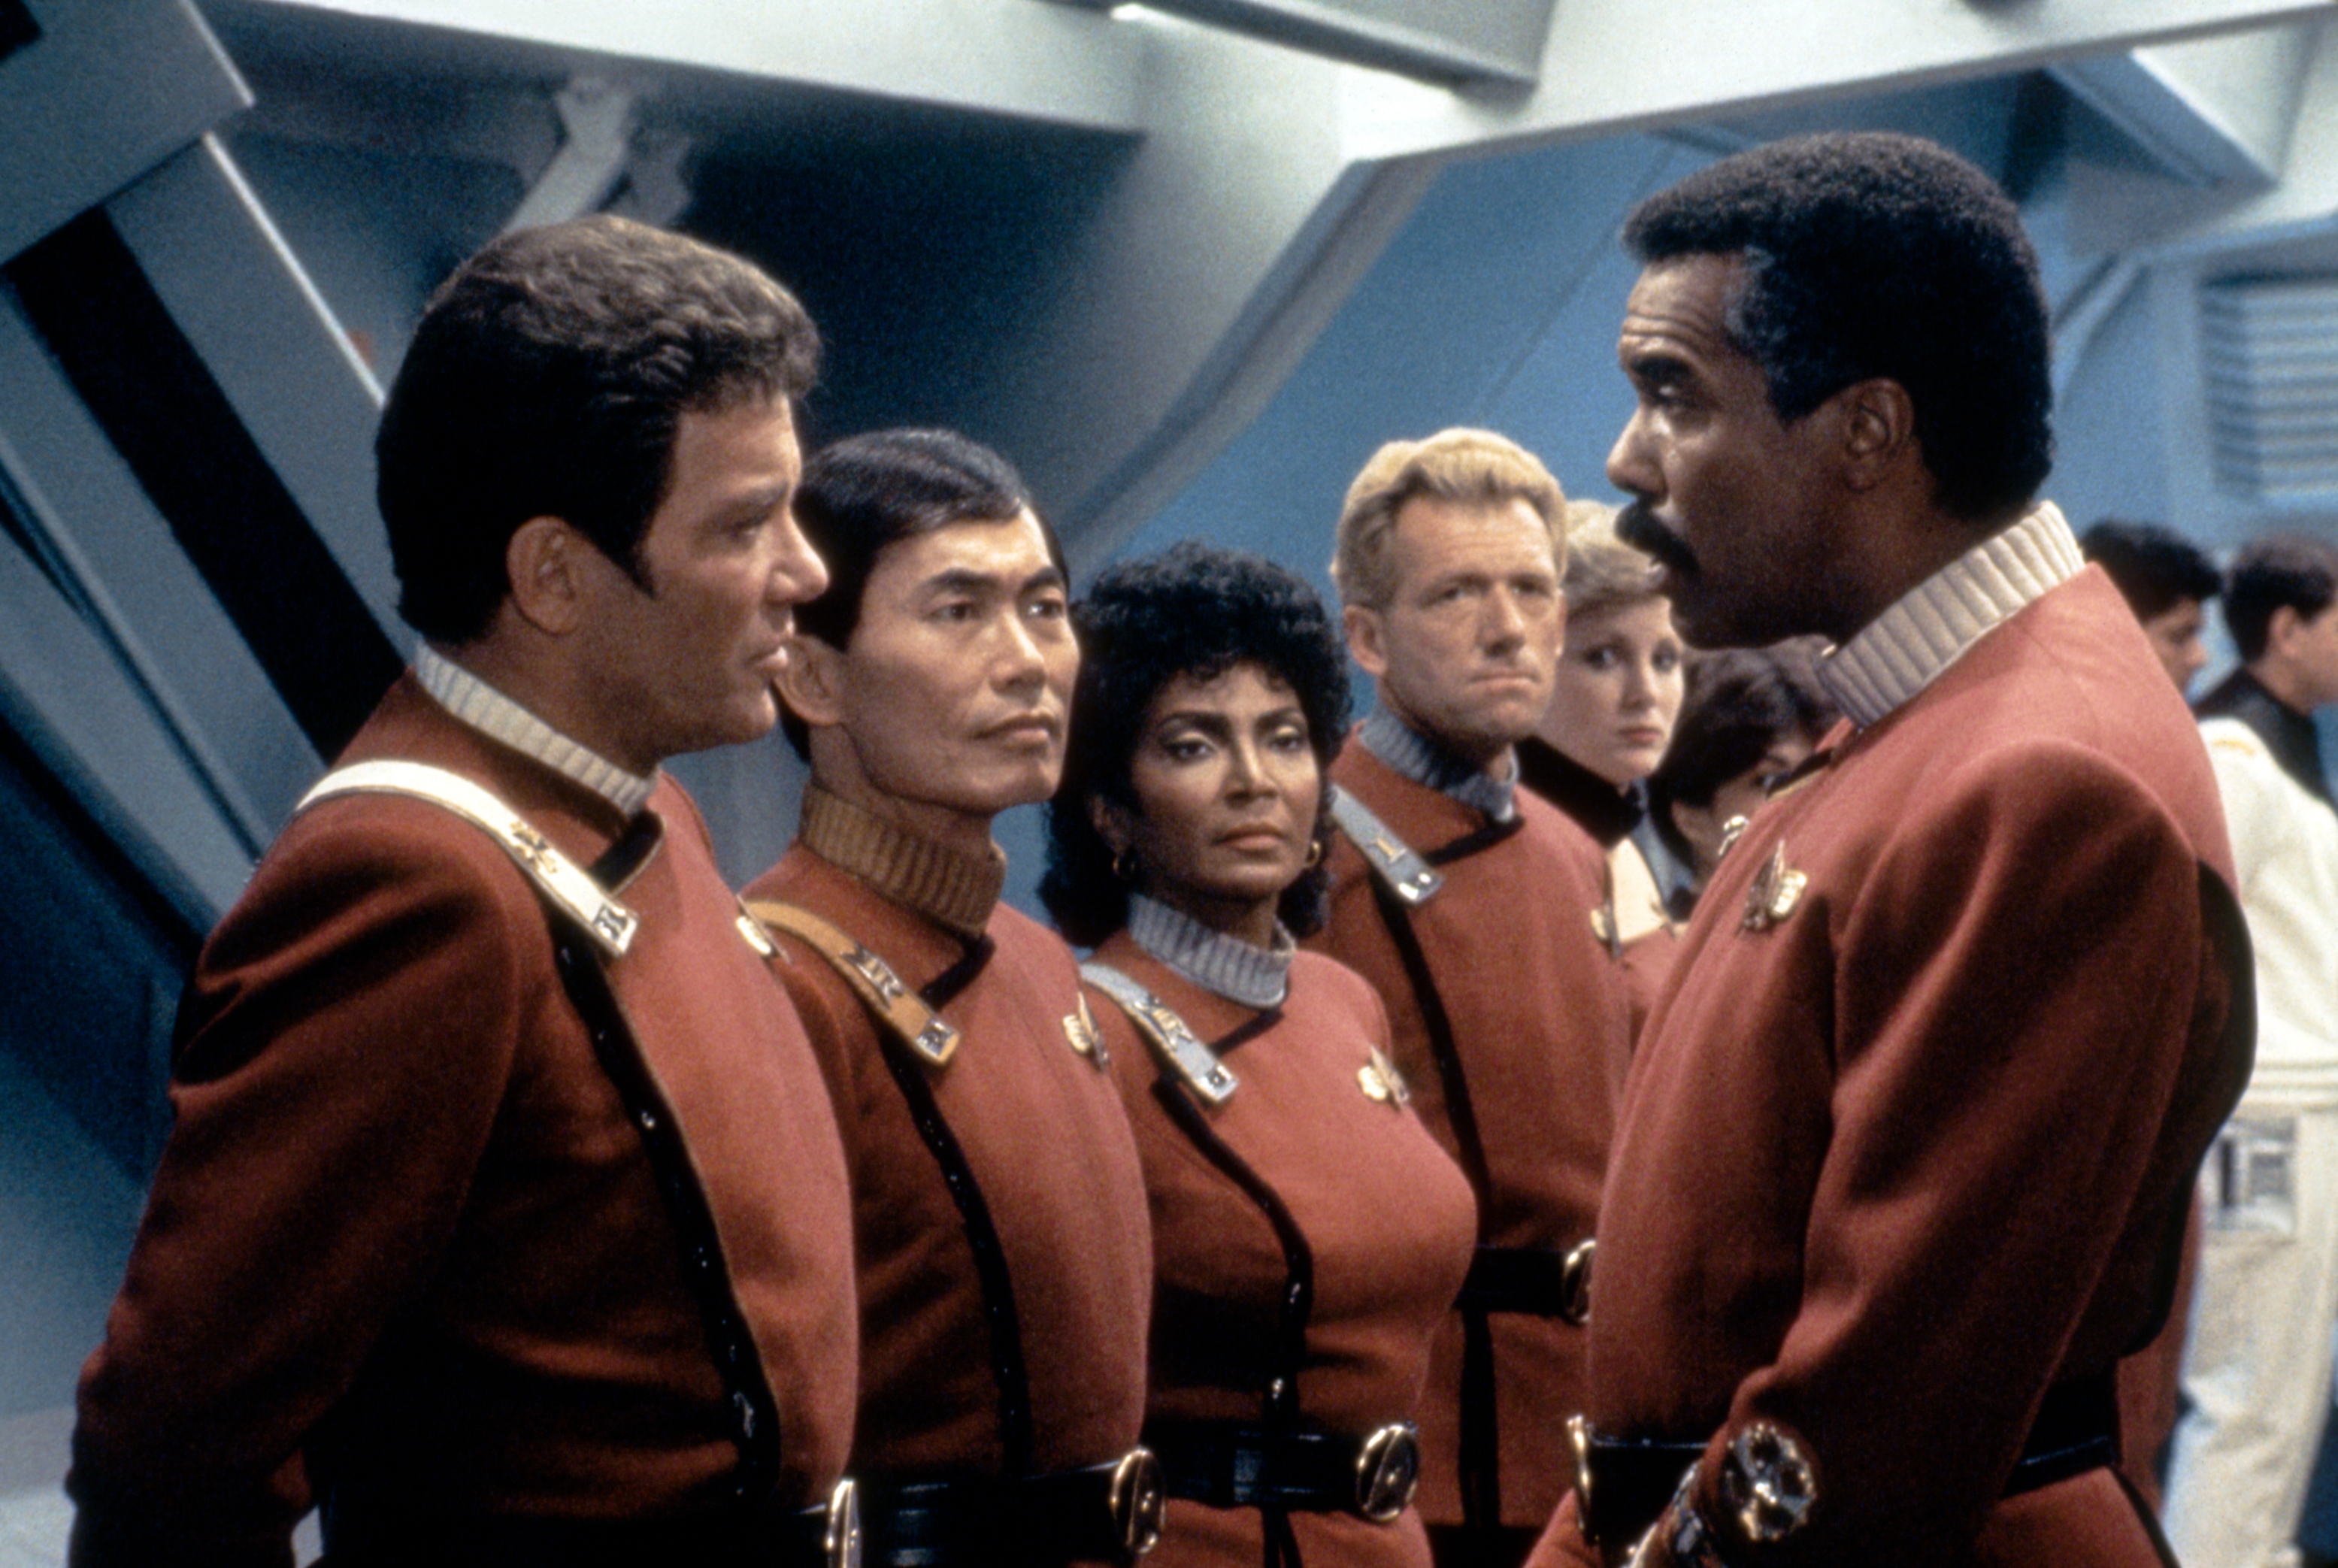 Group of Star Trek characters in uniform, focused on a conversation. Stars include William Shatner and Leonard Nimoy